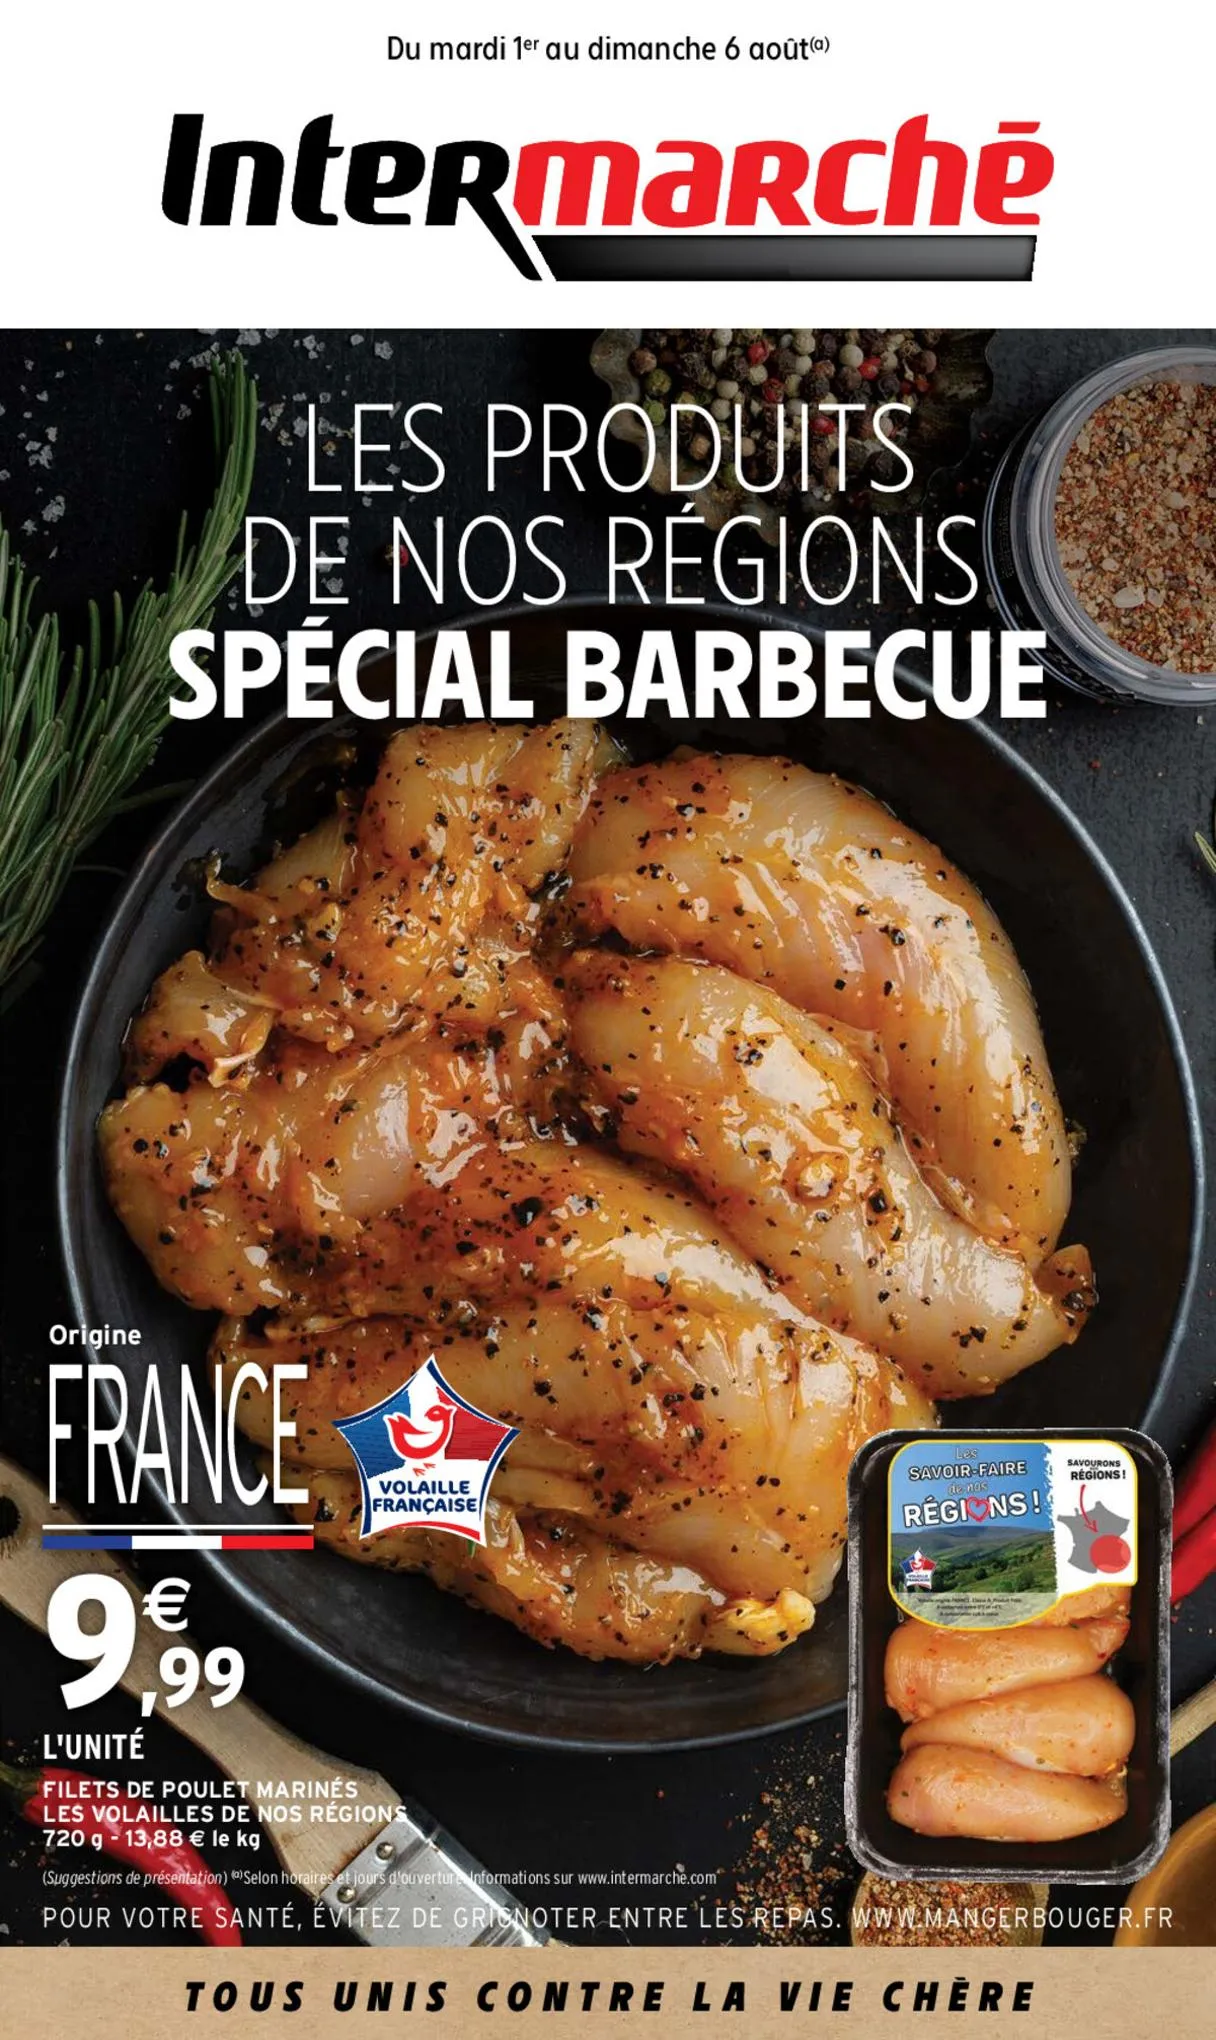 Catalogue S31 - R5 - BARBECUE, page 00001